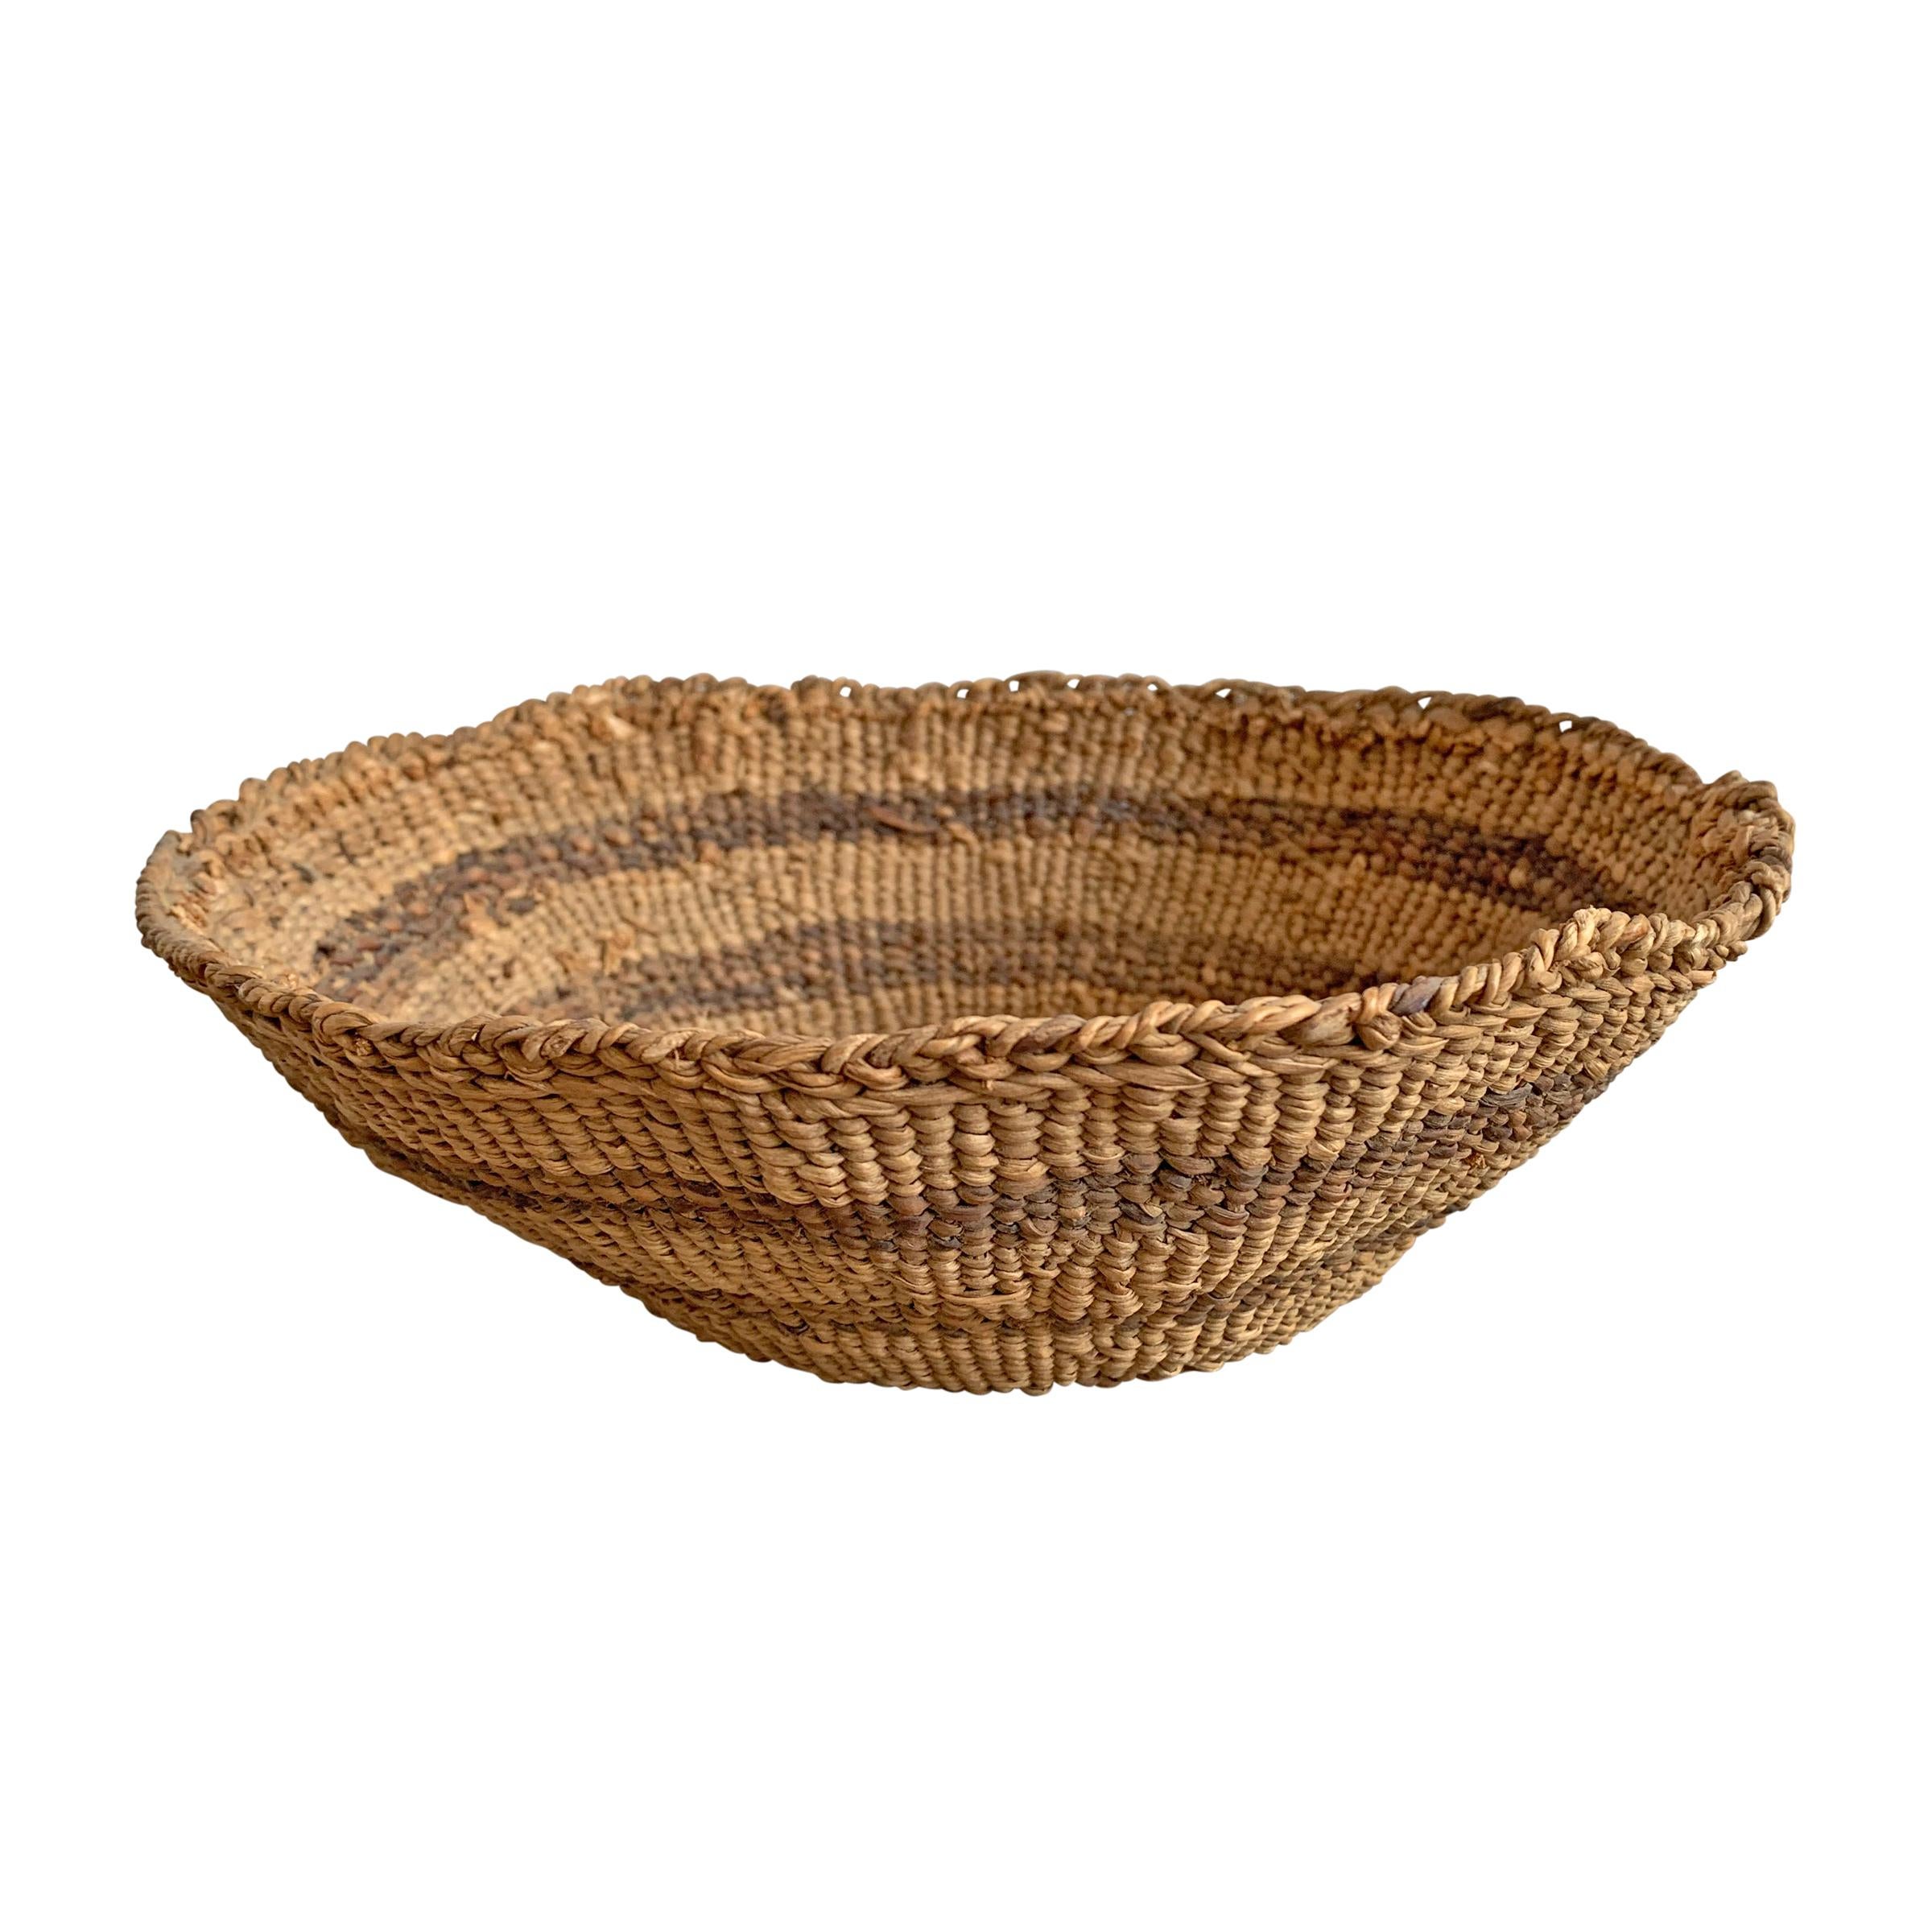 Early 20th Century Pacific NW Native American Basket 2